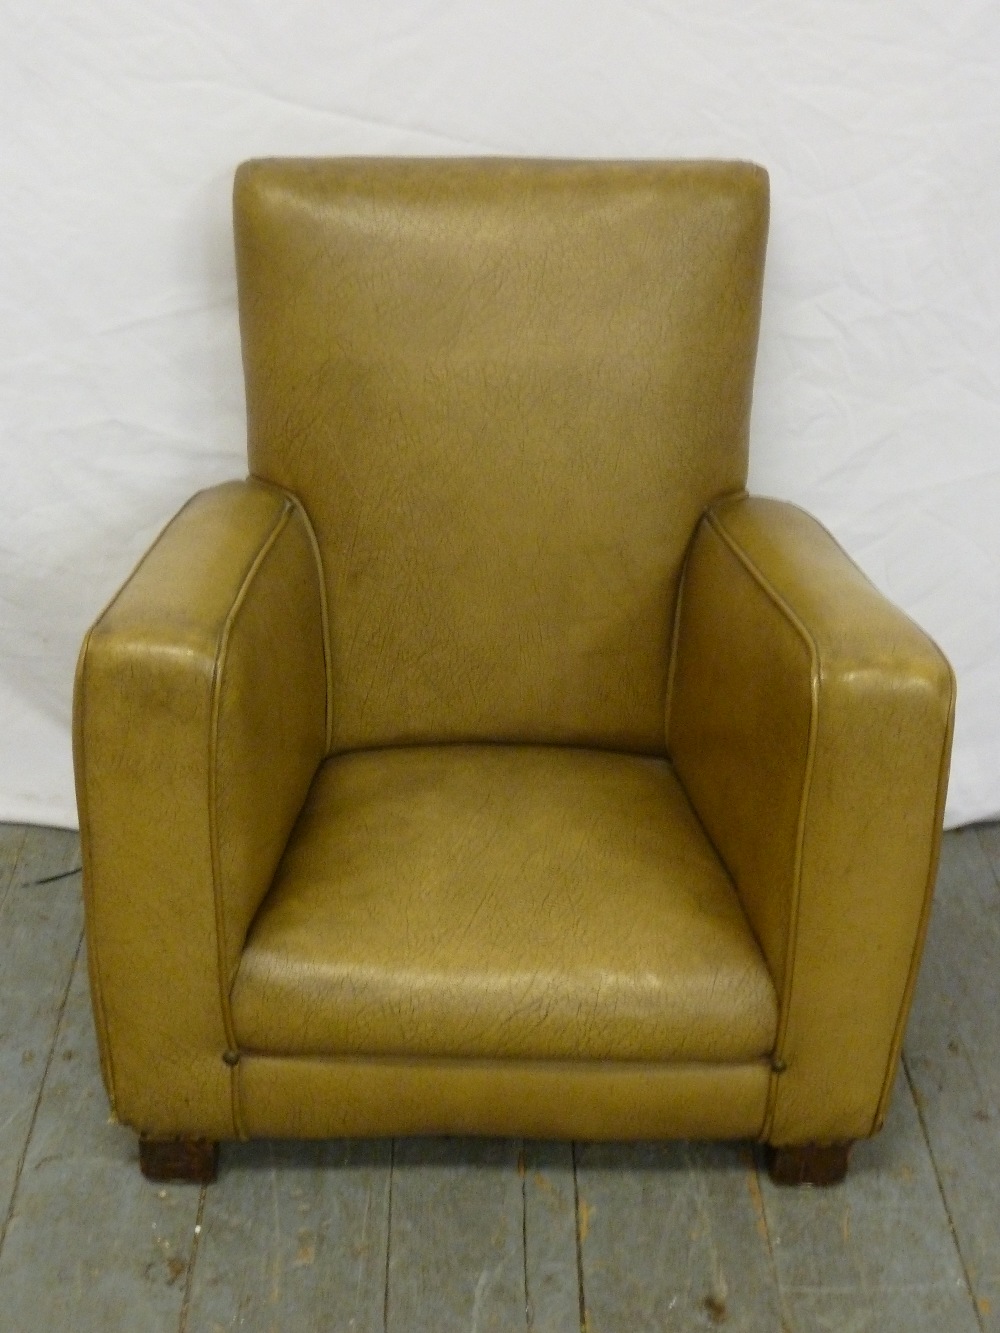 Mid 20th century leather childs armchair